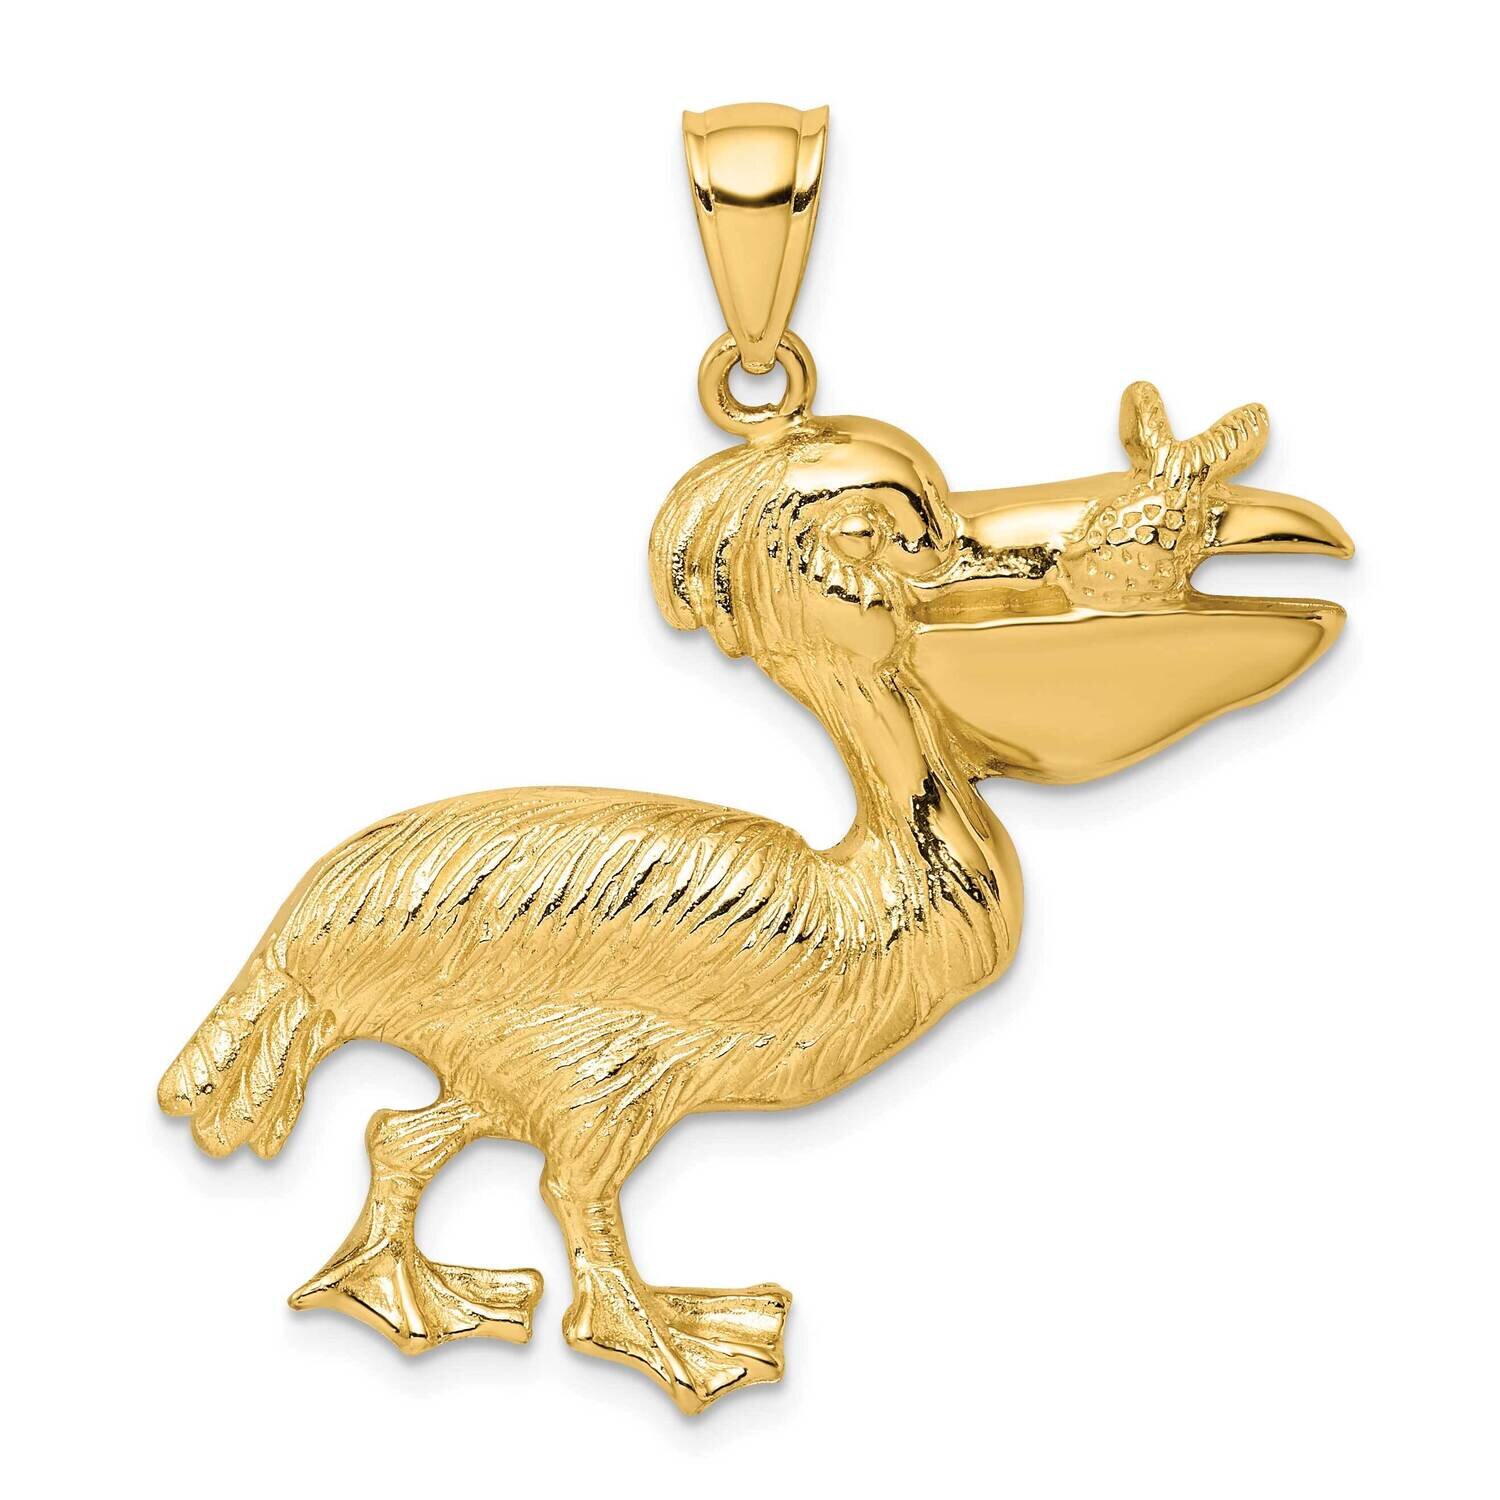 Pelican with Fish In Mouth Charm 14k Gold 2-D K7915